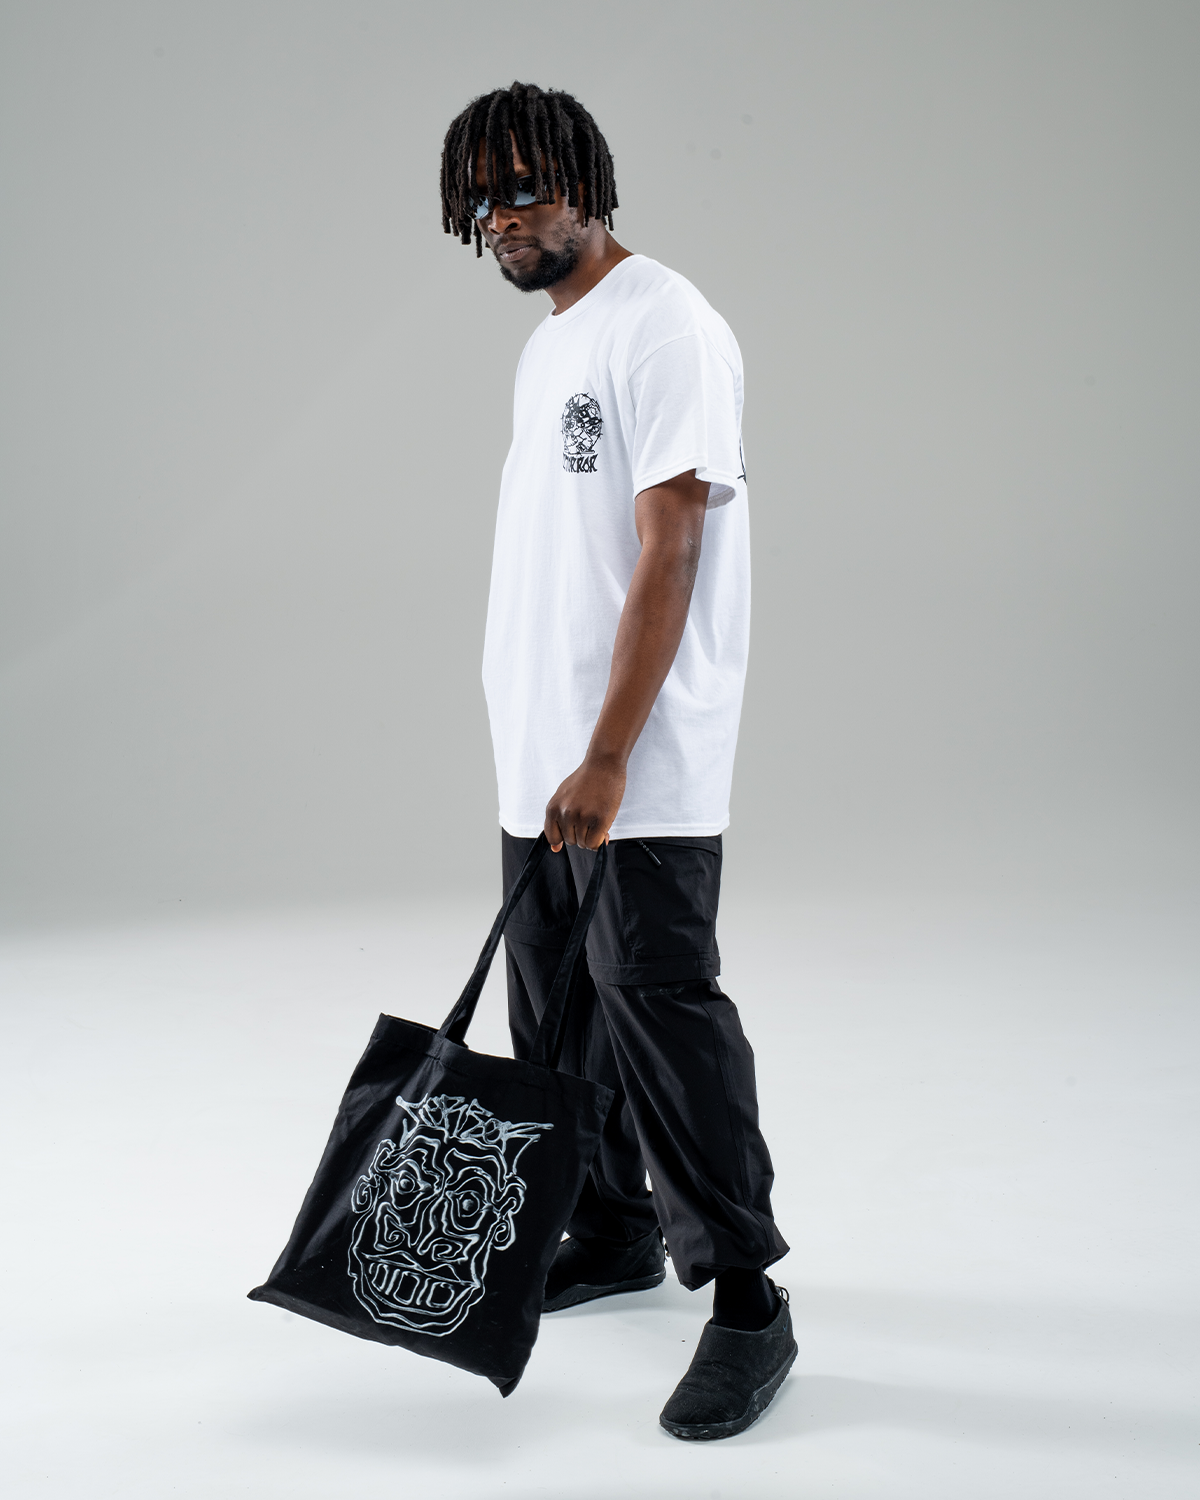 METAL FACE TOTE | STORROR | parkour clothing & technical sportswear